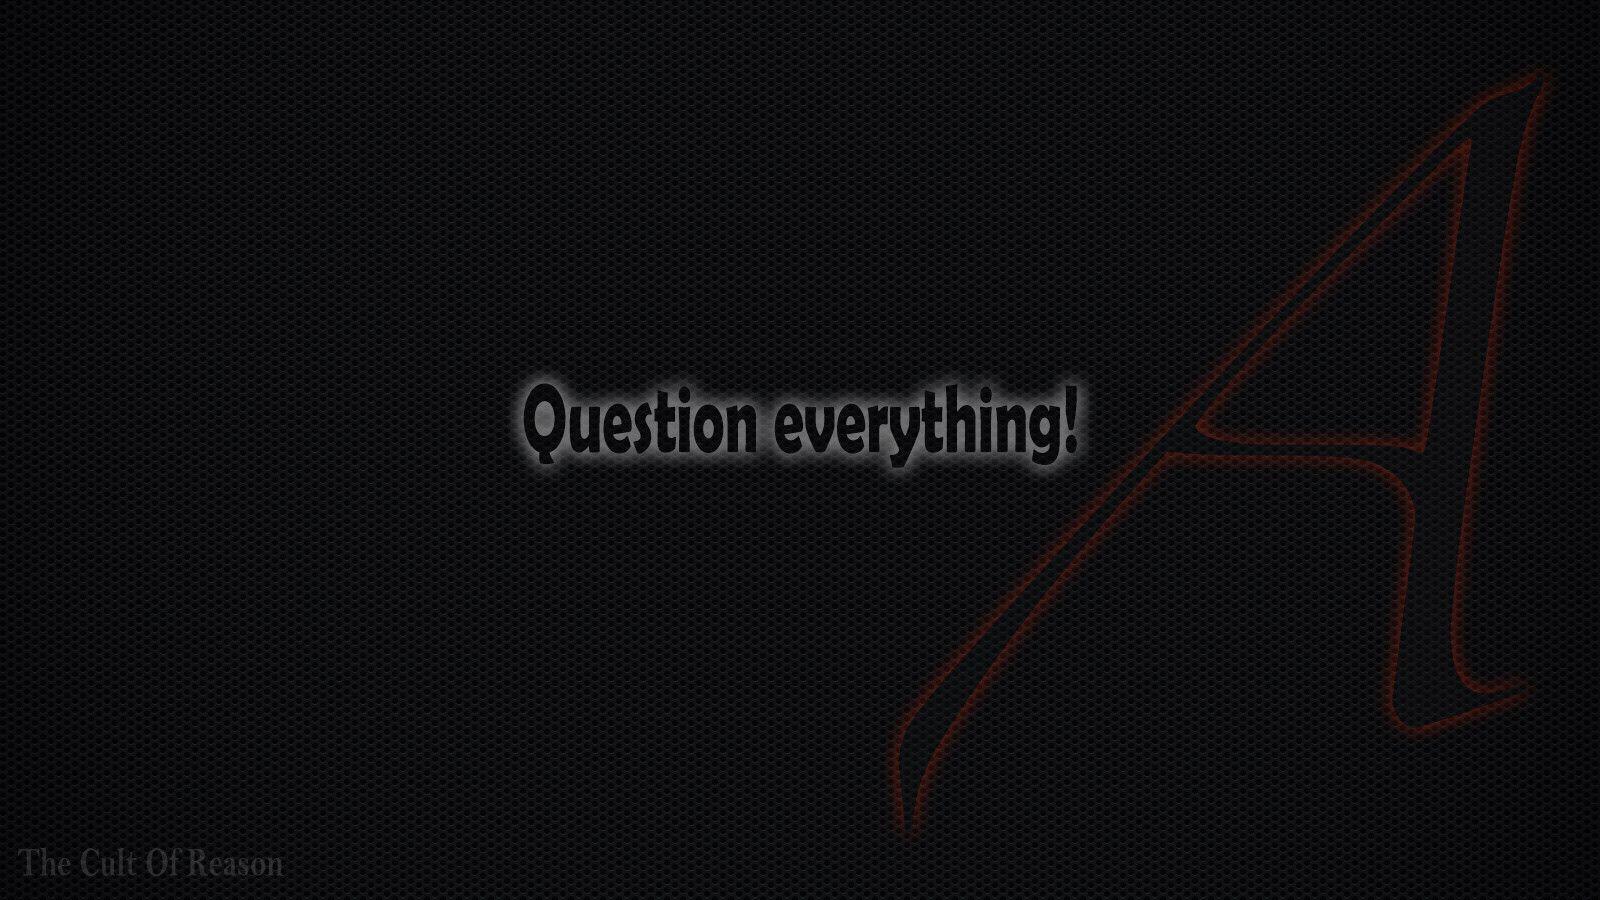 Wallpaper Free Atheism Question Everything 1600x900PX Atheist